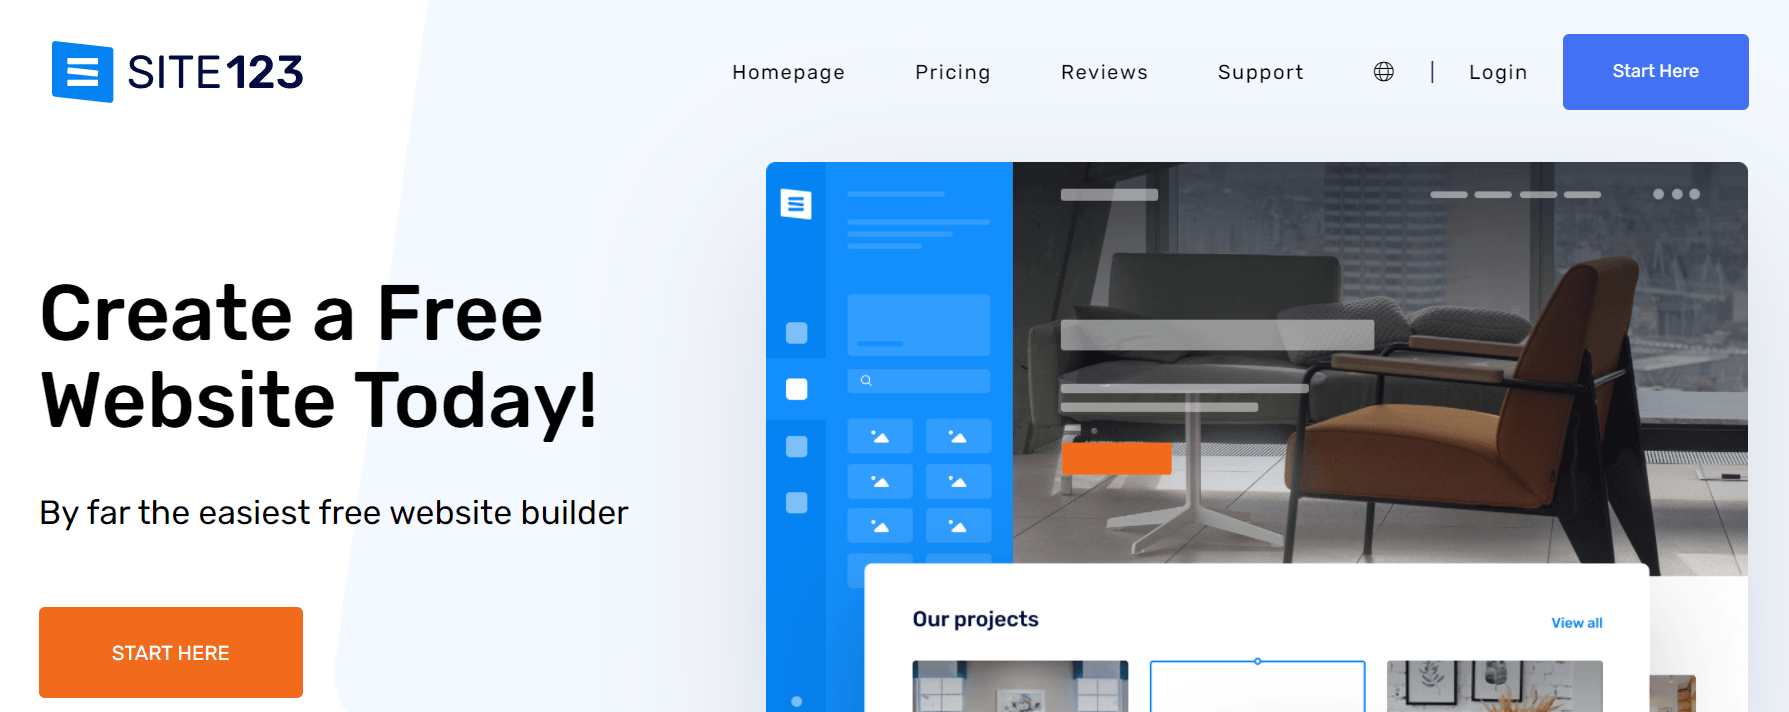 SITE123 is one of the best free landing page builders. 